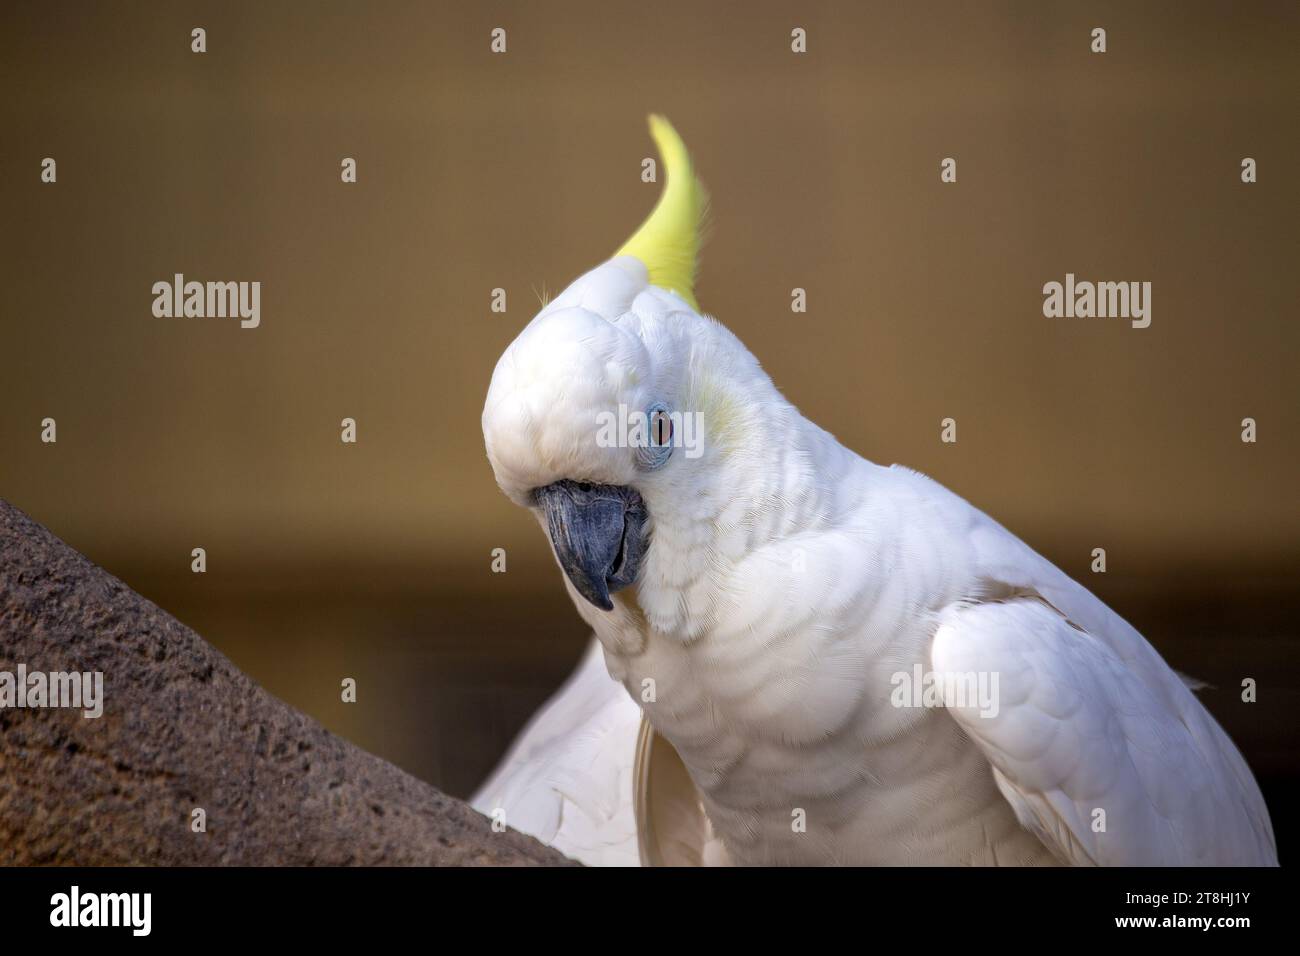 A magnificent Yellow-crested Cockatoo, its distinctive yellow crest and vibrant white plumage standing out against the vibrant greenery of its native Stock Photo